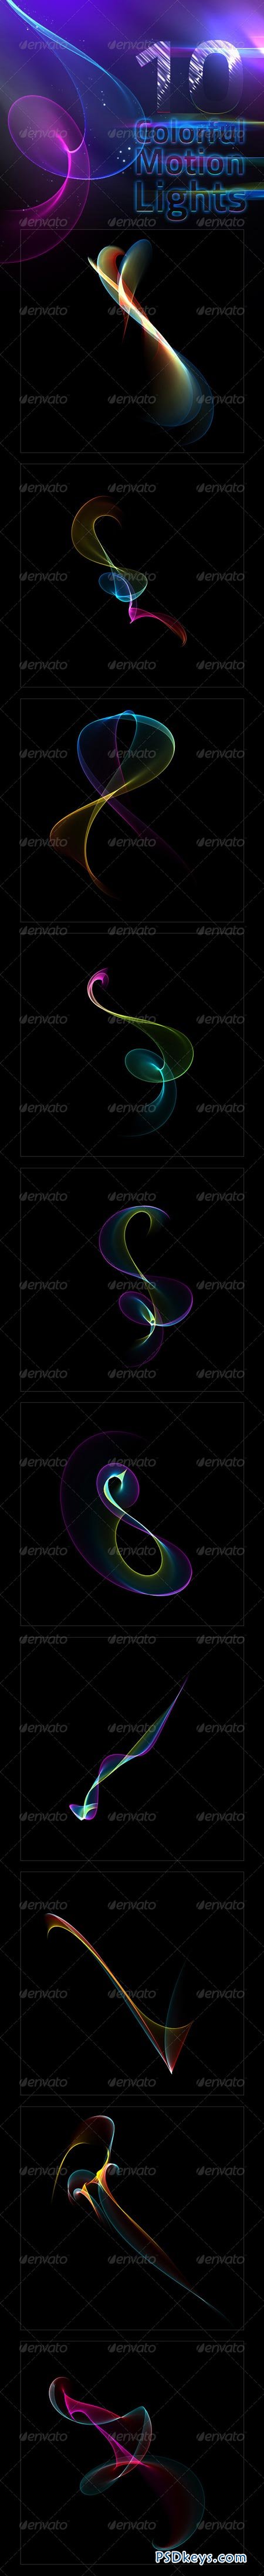 Abstract Motion Light Effects Pack 02 6050677